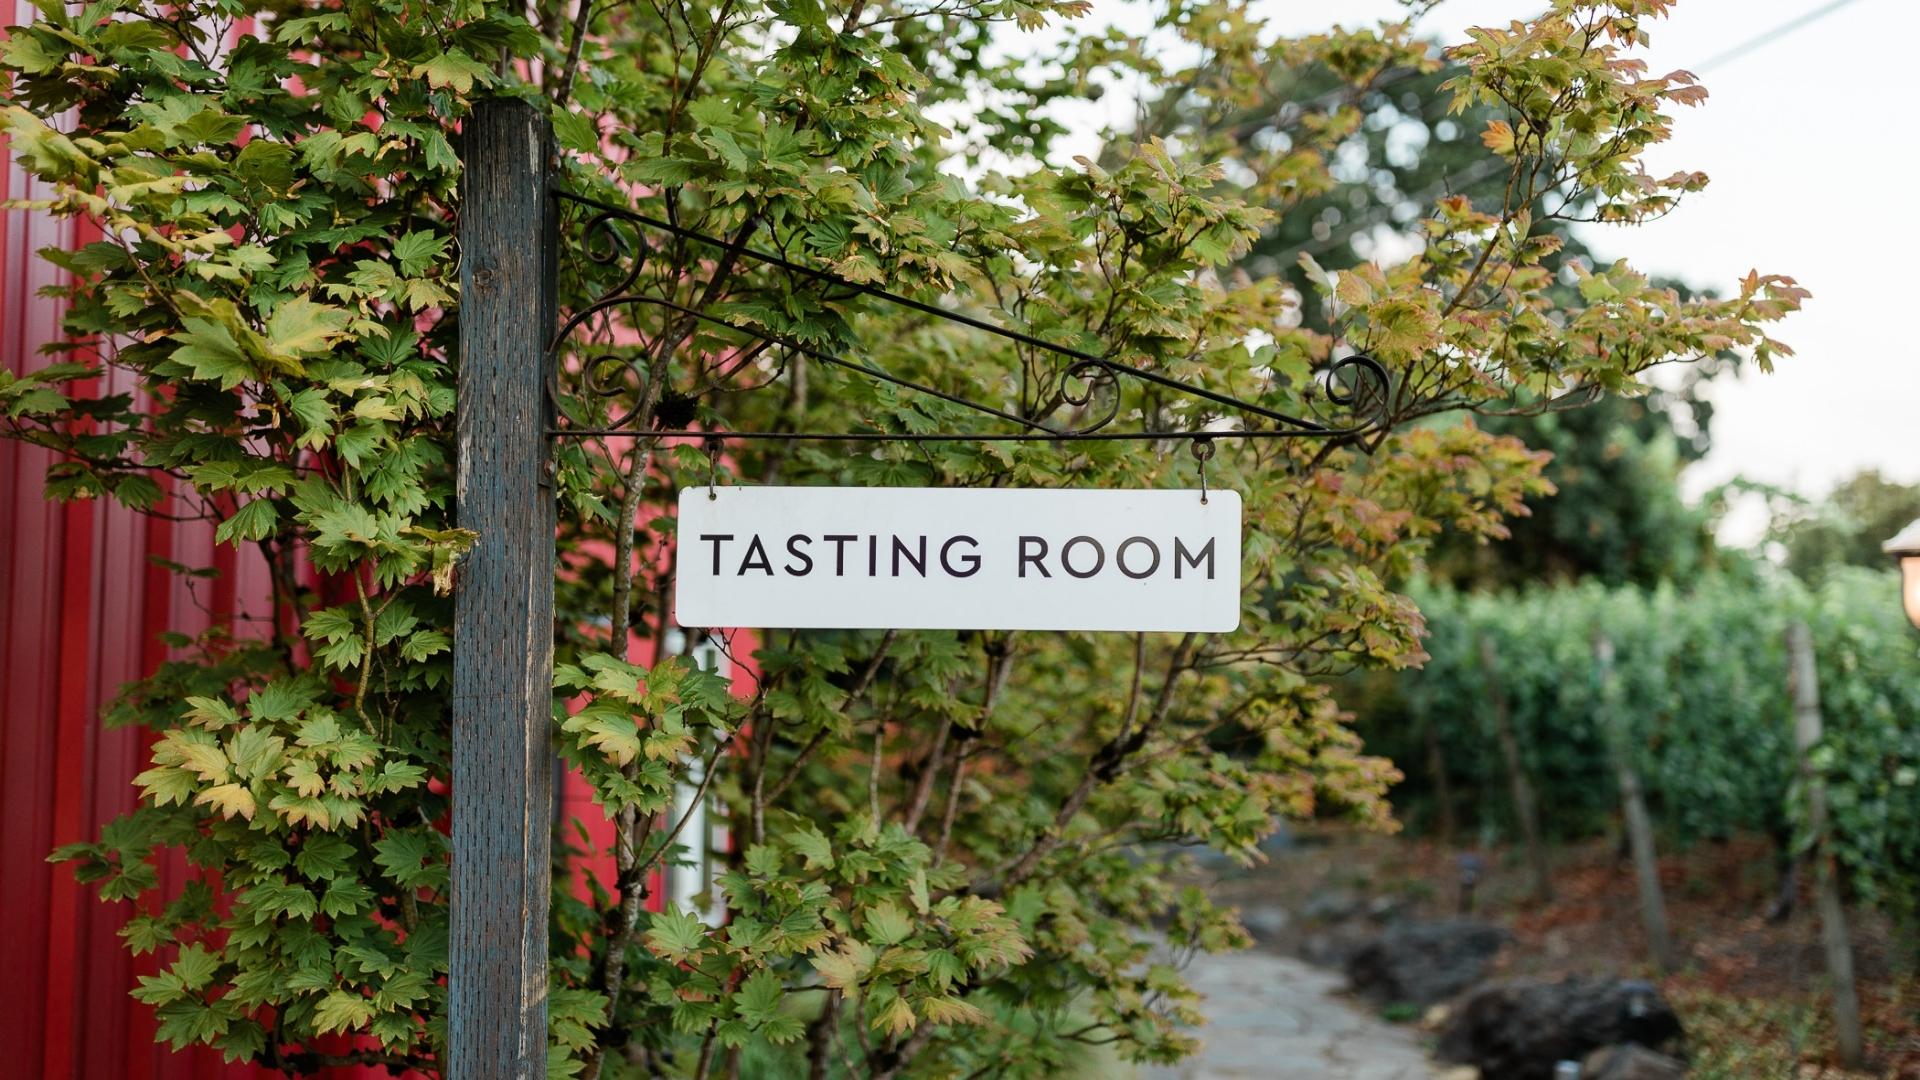 A sign for a tasting room at a winery.